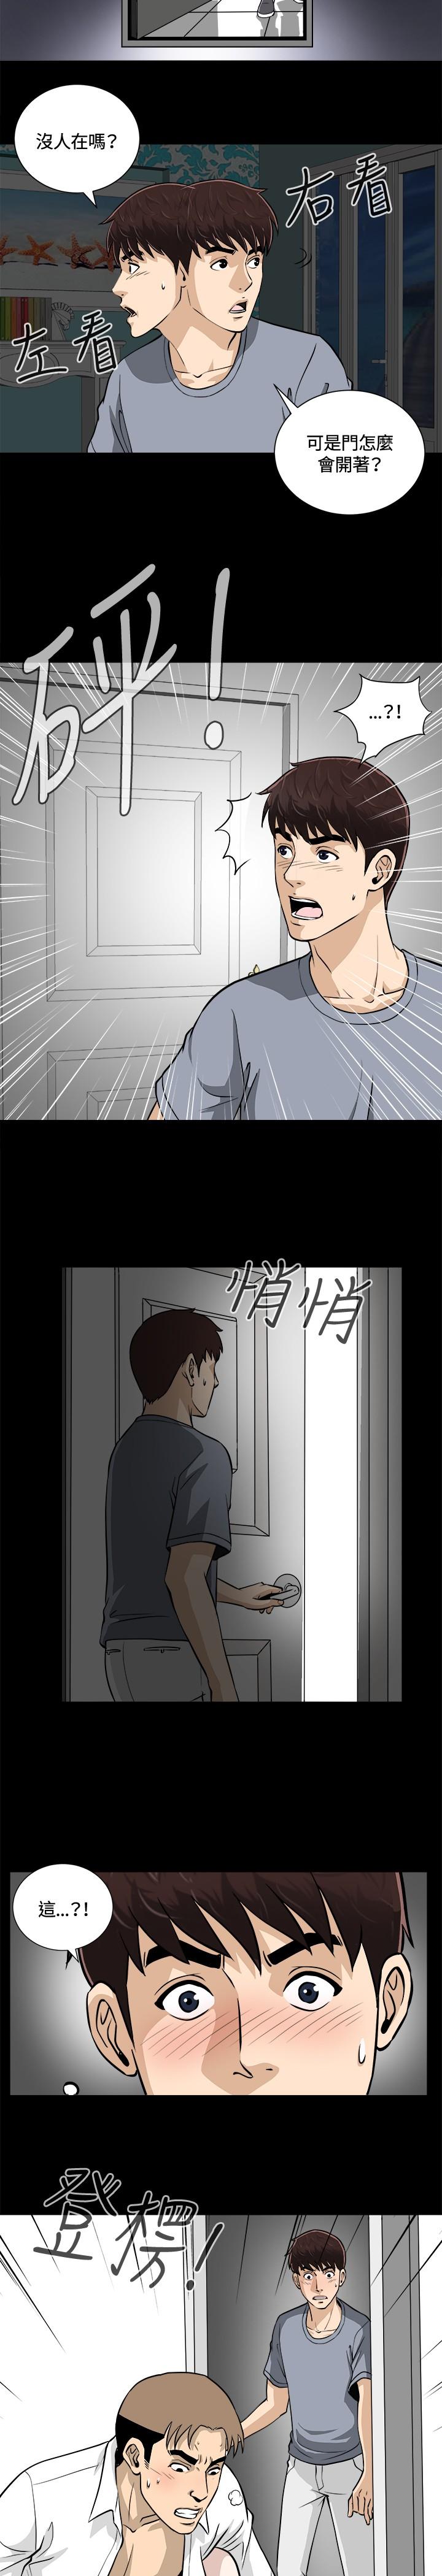 Hijab Dangerous game 危险性游戏 Ch.11 Argenta - Page 9